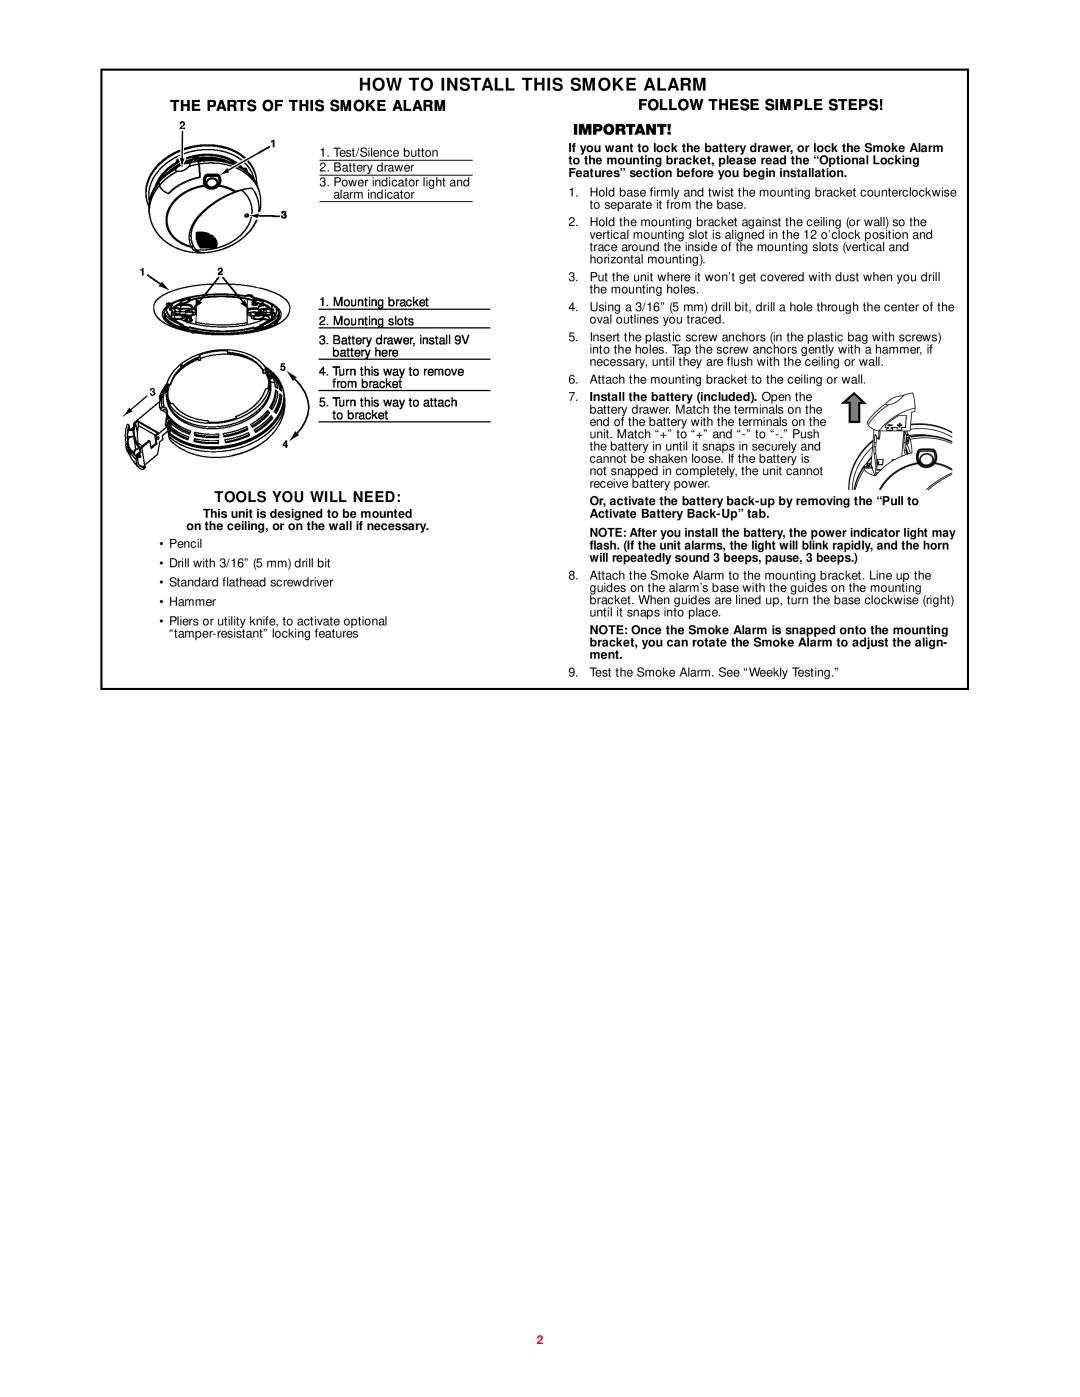 BRK electronic SA710 user manual How To Install This Smoke Alarm, The Parts Of This Smoke Alarm, Tools You Will Need 